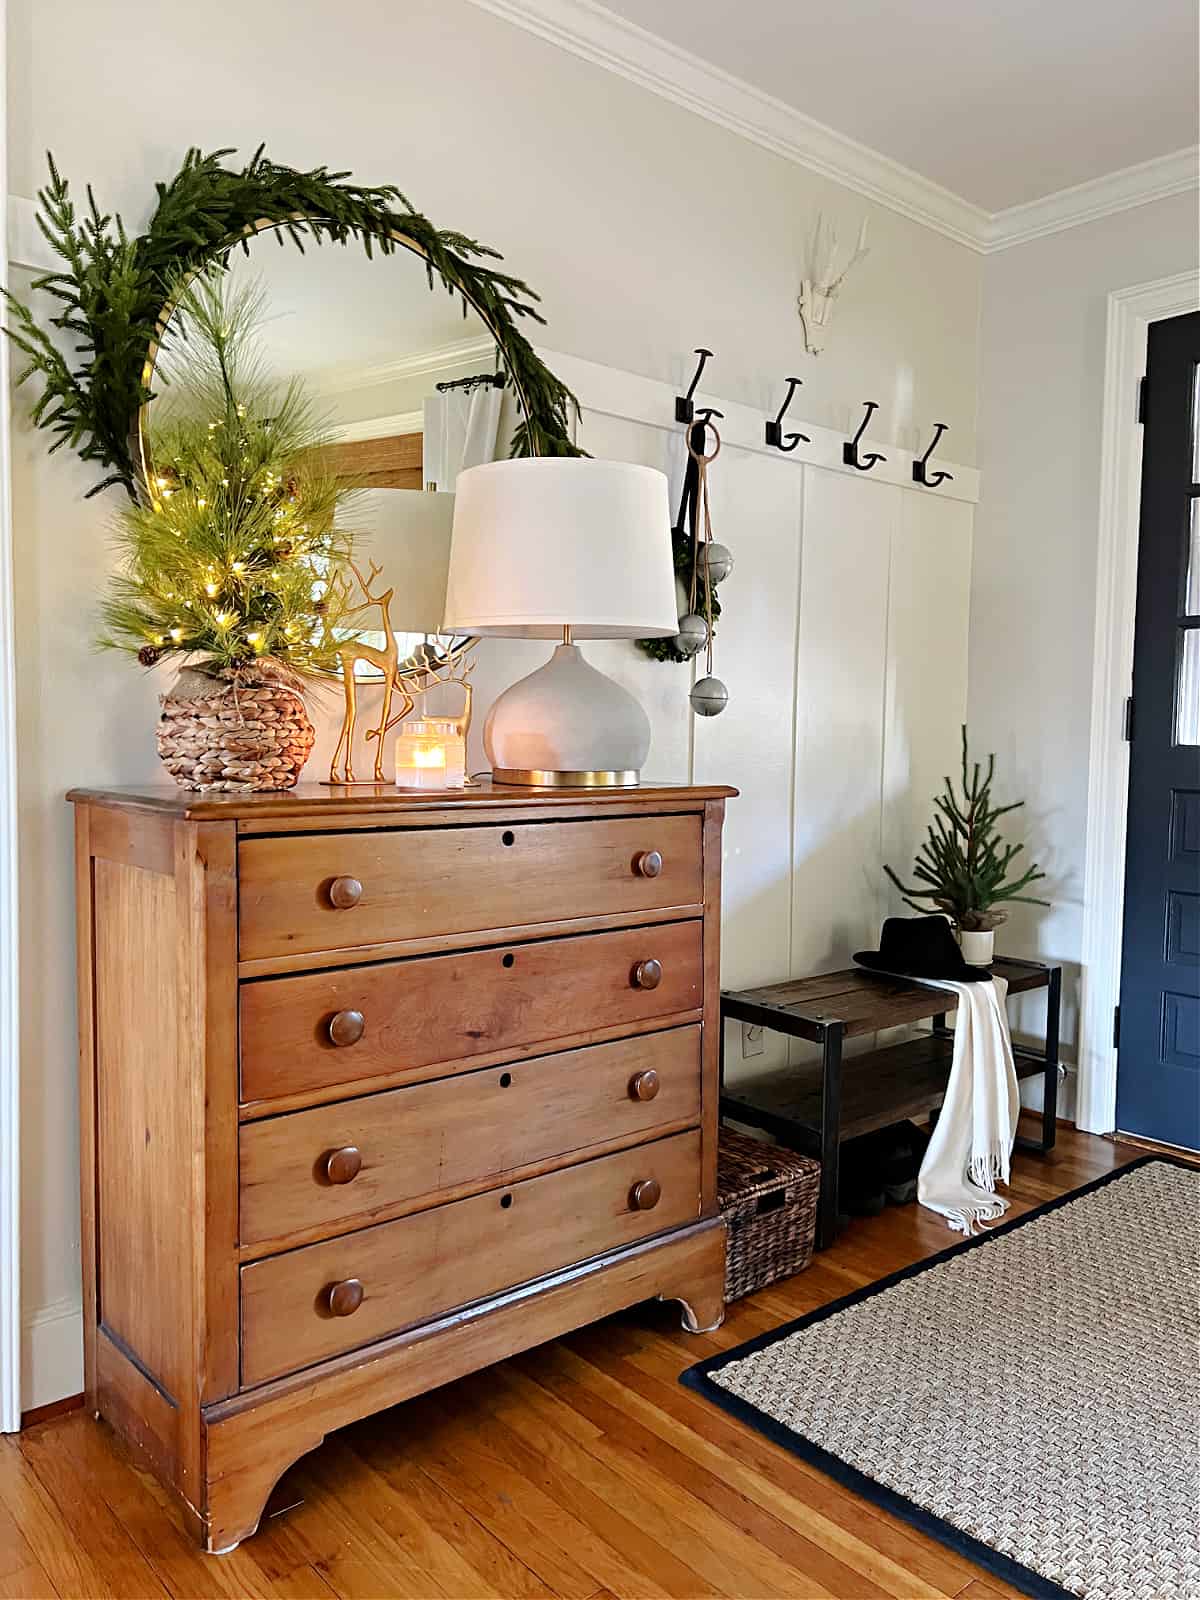 entryway with console and bench decorated for Christmas